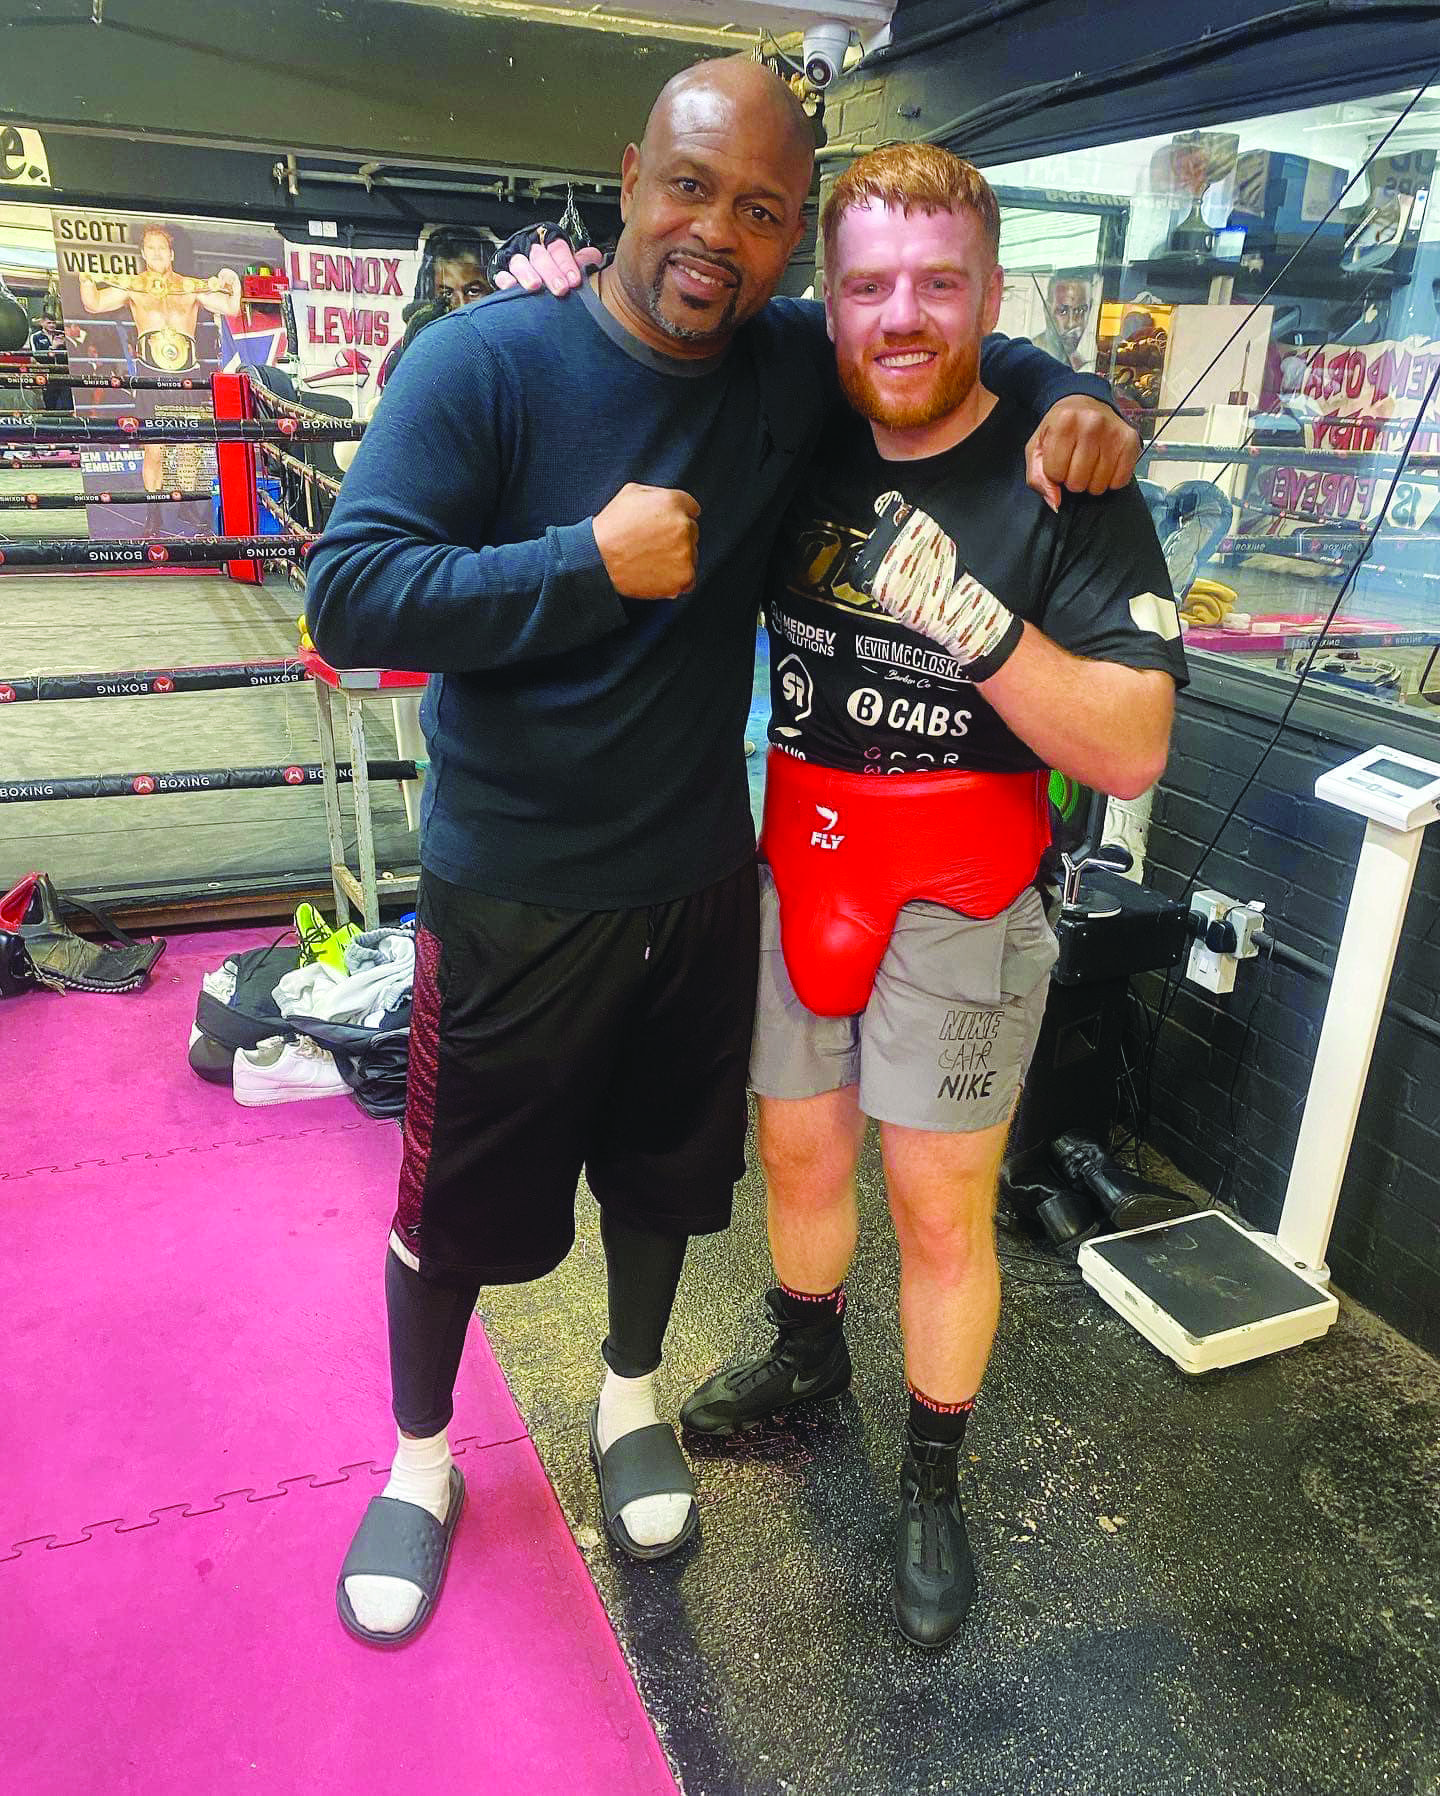 Owen O’Neill - pictured with the legendary Roy Jones Jr during sparring with Chris Eubank Jr - says he is ready to get his year off to a flying start on Saturday